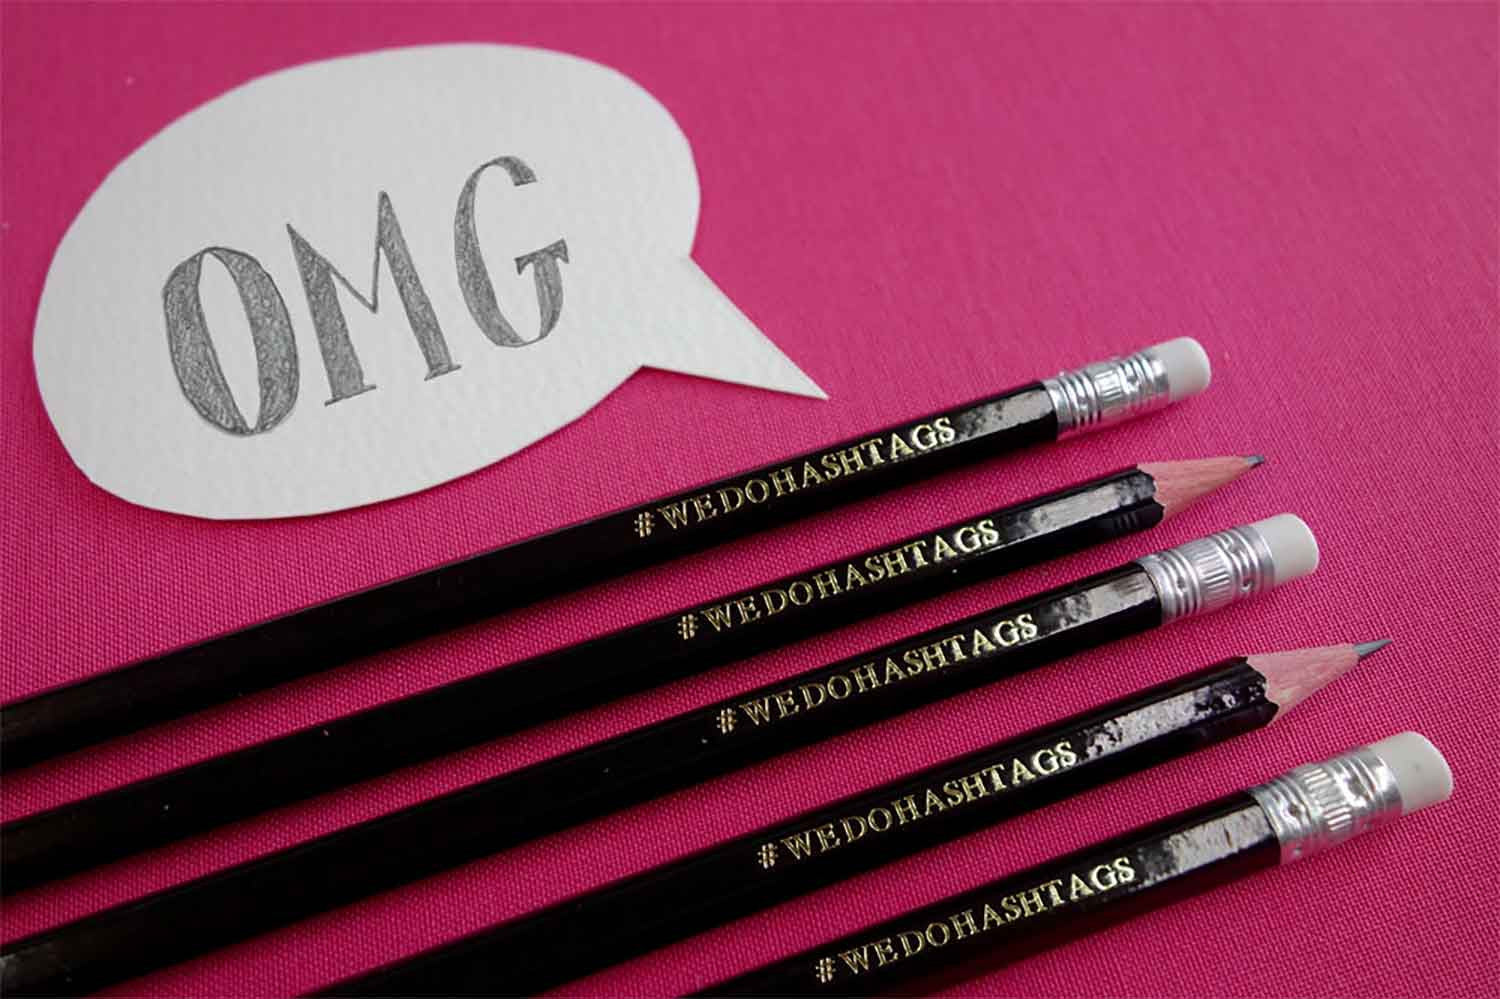 Personalised pencils gift pack We do hashtags